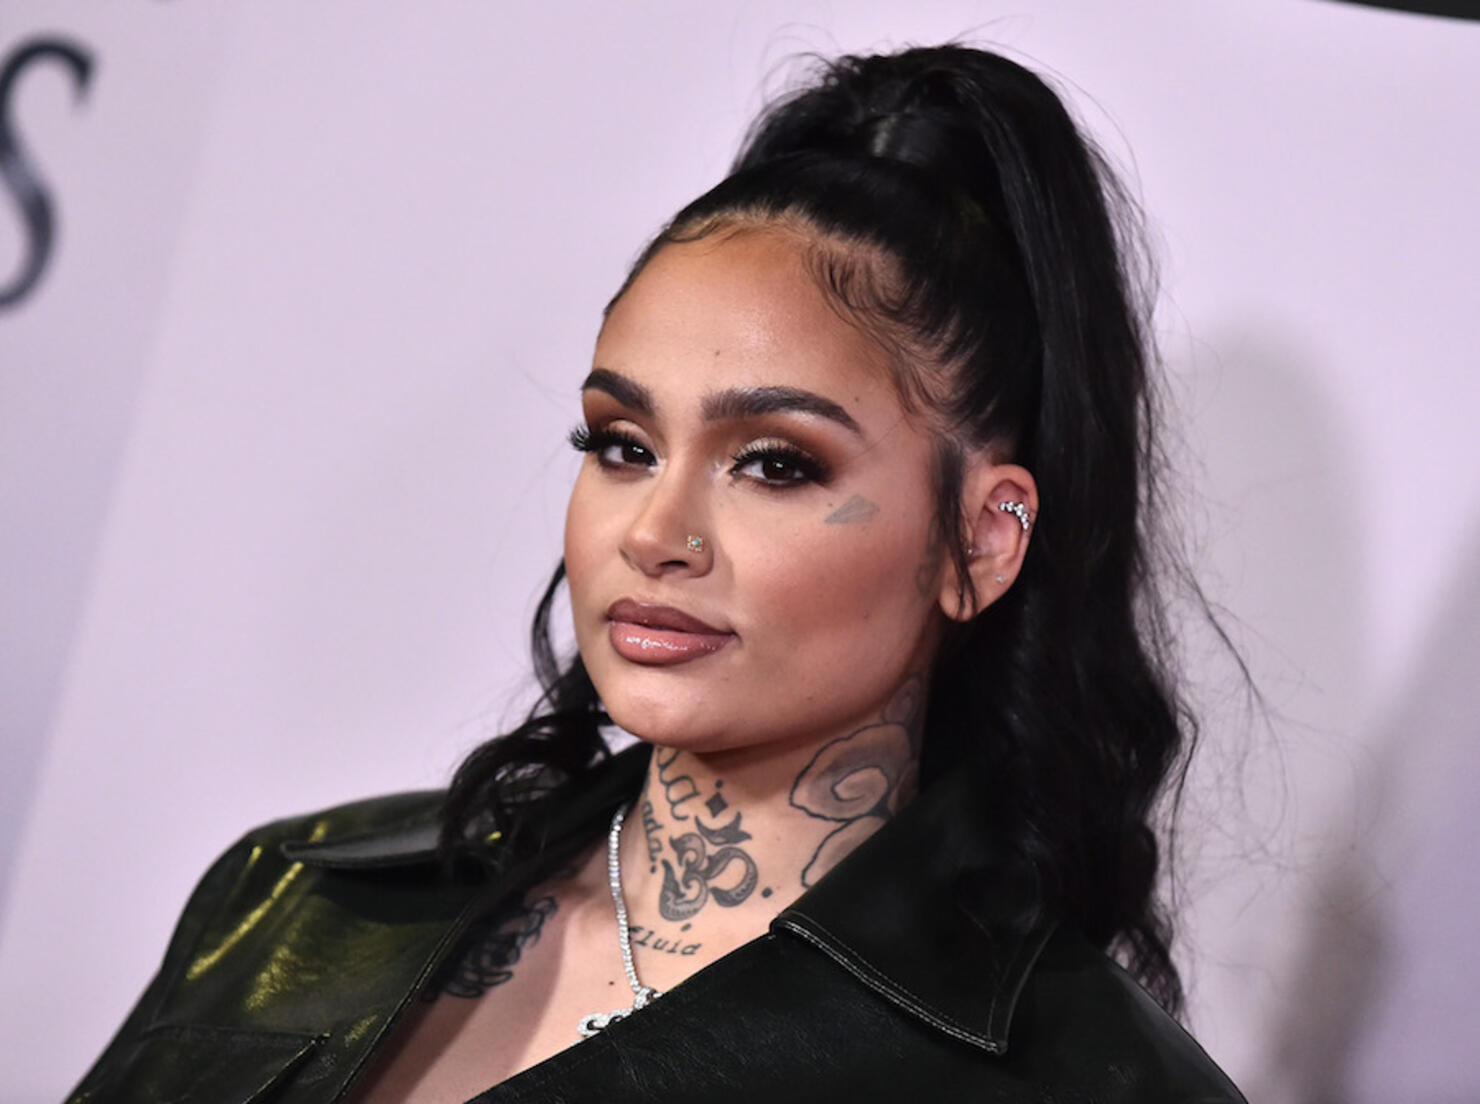 Kehlani Details Why She Removed Tory Lanez From Her Deluxe Album.